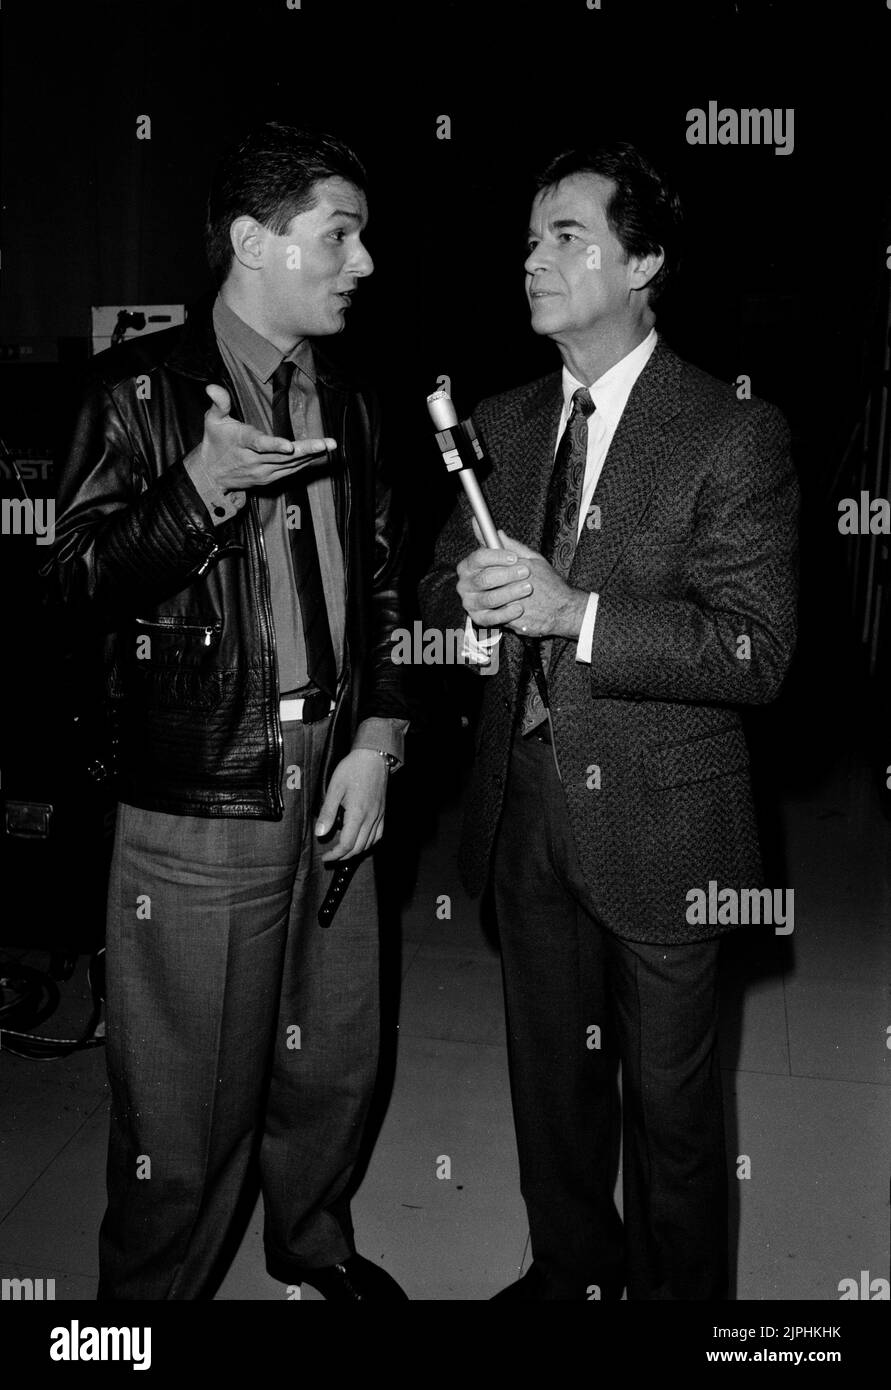 Falco bei American Bandstand, 1984 Credit: Ron Wolfson / MediaPunch Stockfoto